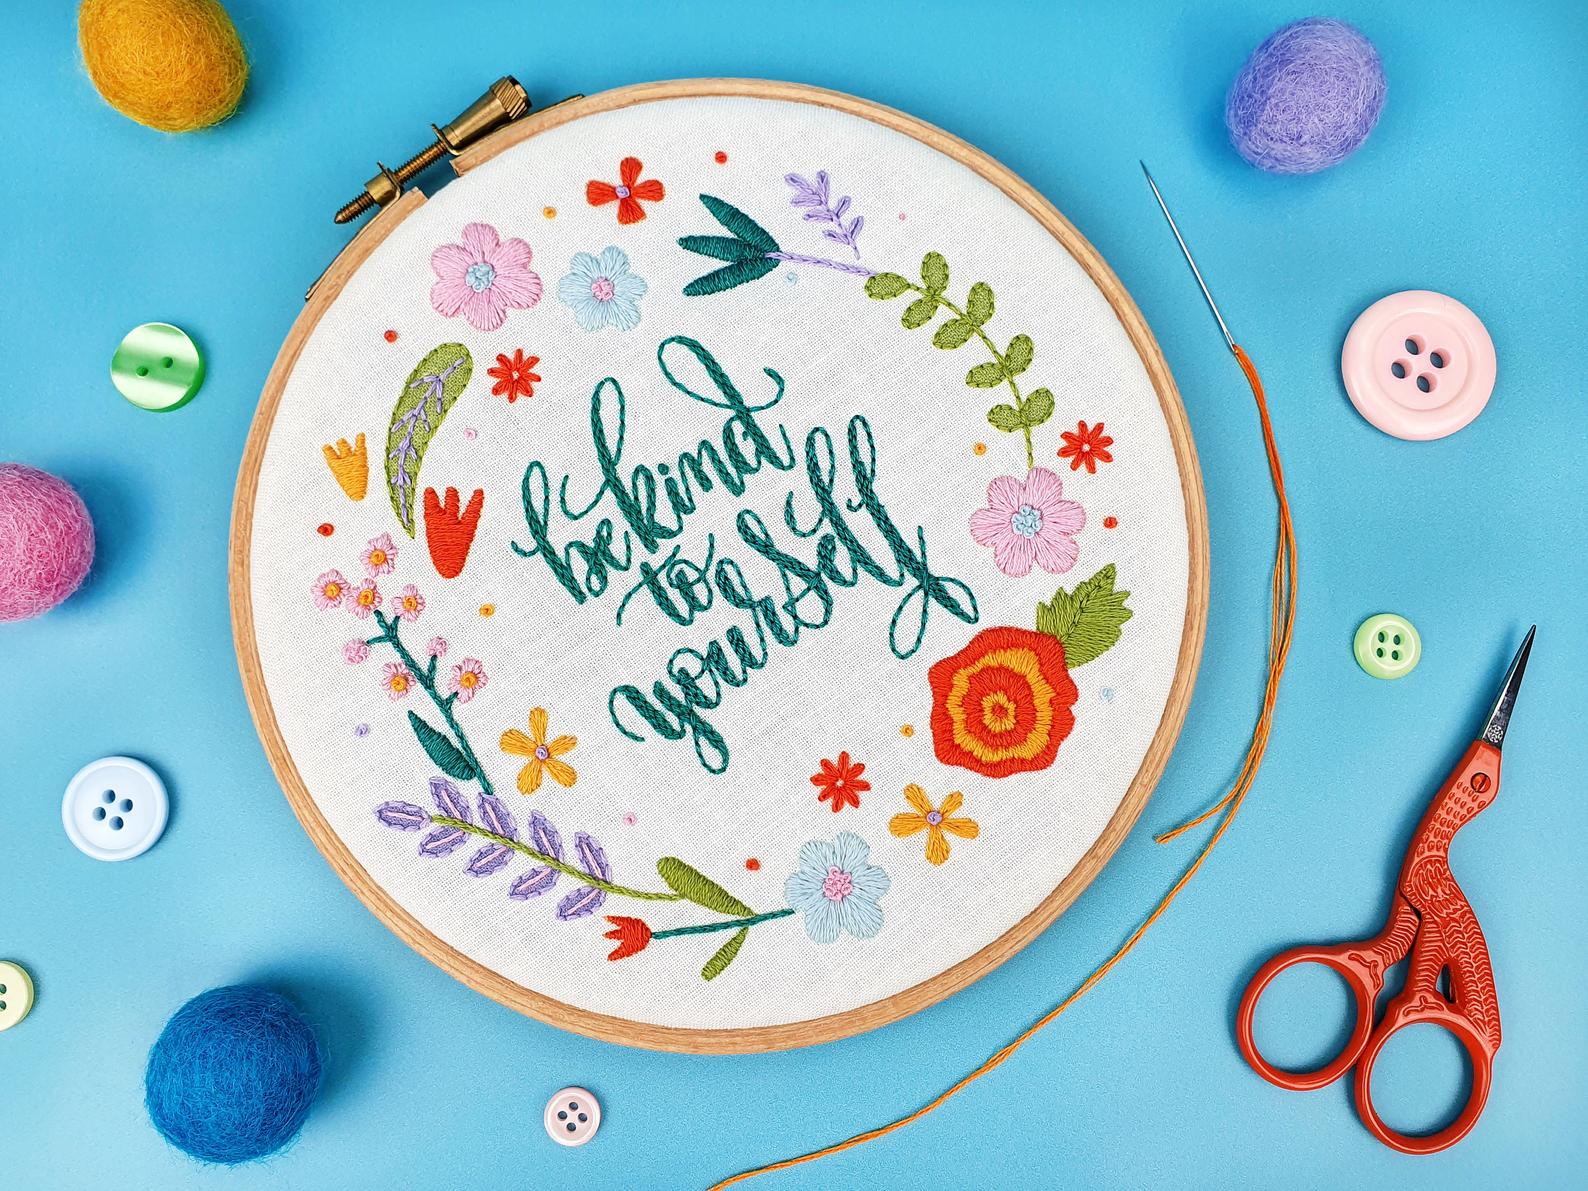 Be Kind To Yourself Embroidery Kit